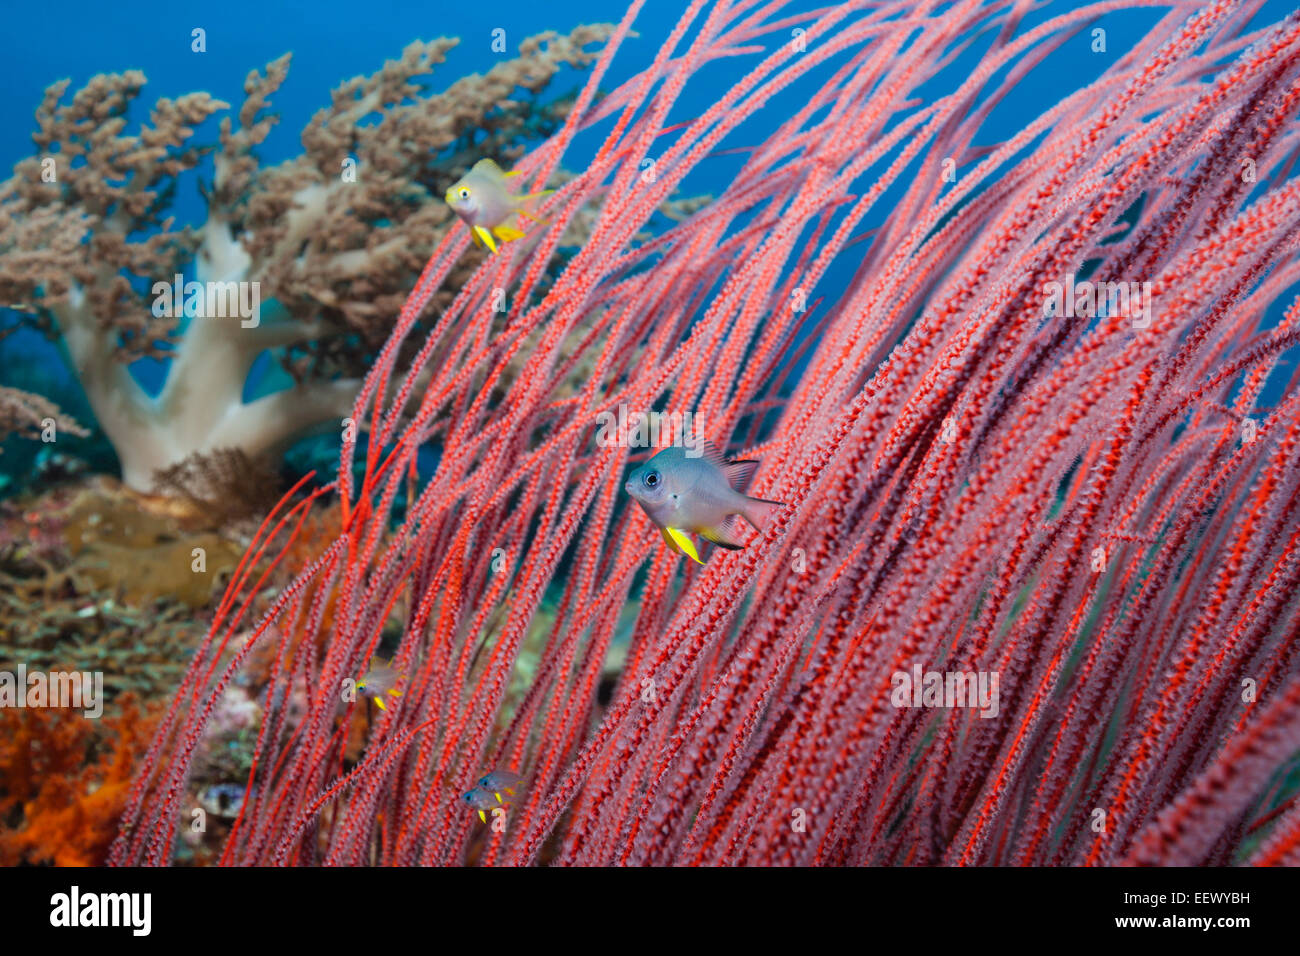 Red Sea Whip Coral, Ellisella ceratophyta, Tanimbar Islands, Moluccas, Indonesia Stock Photo